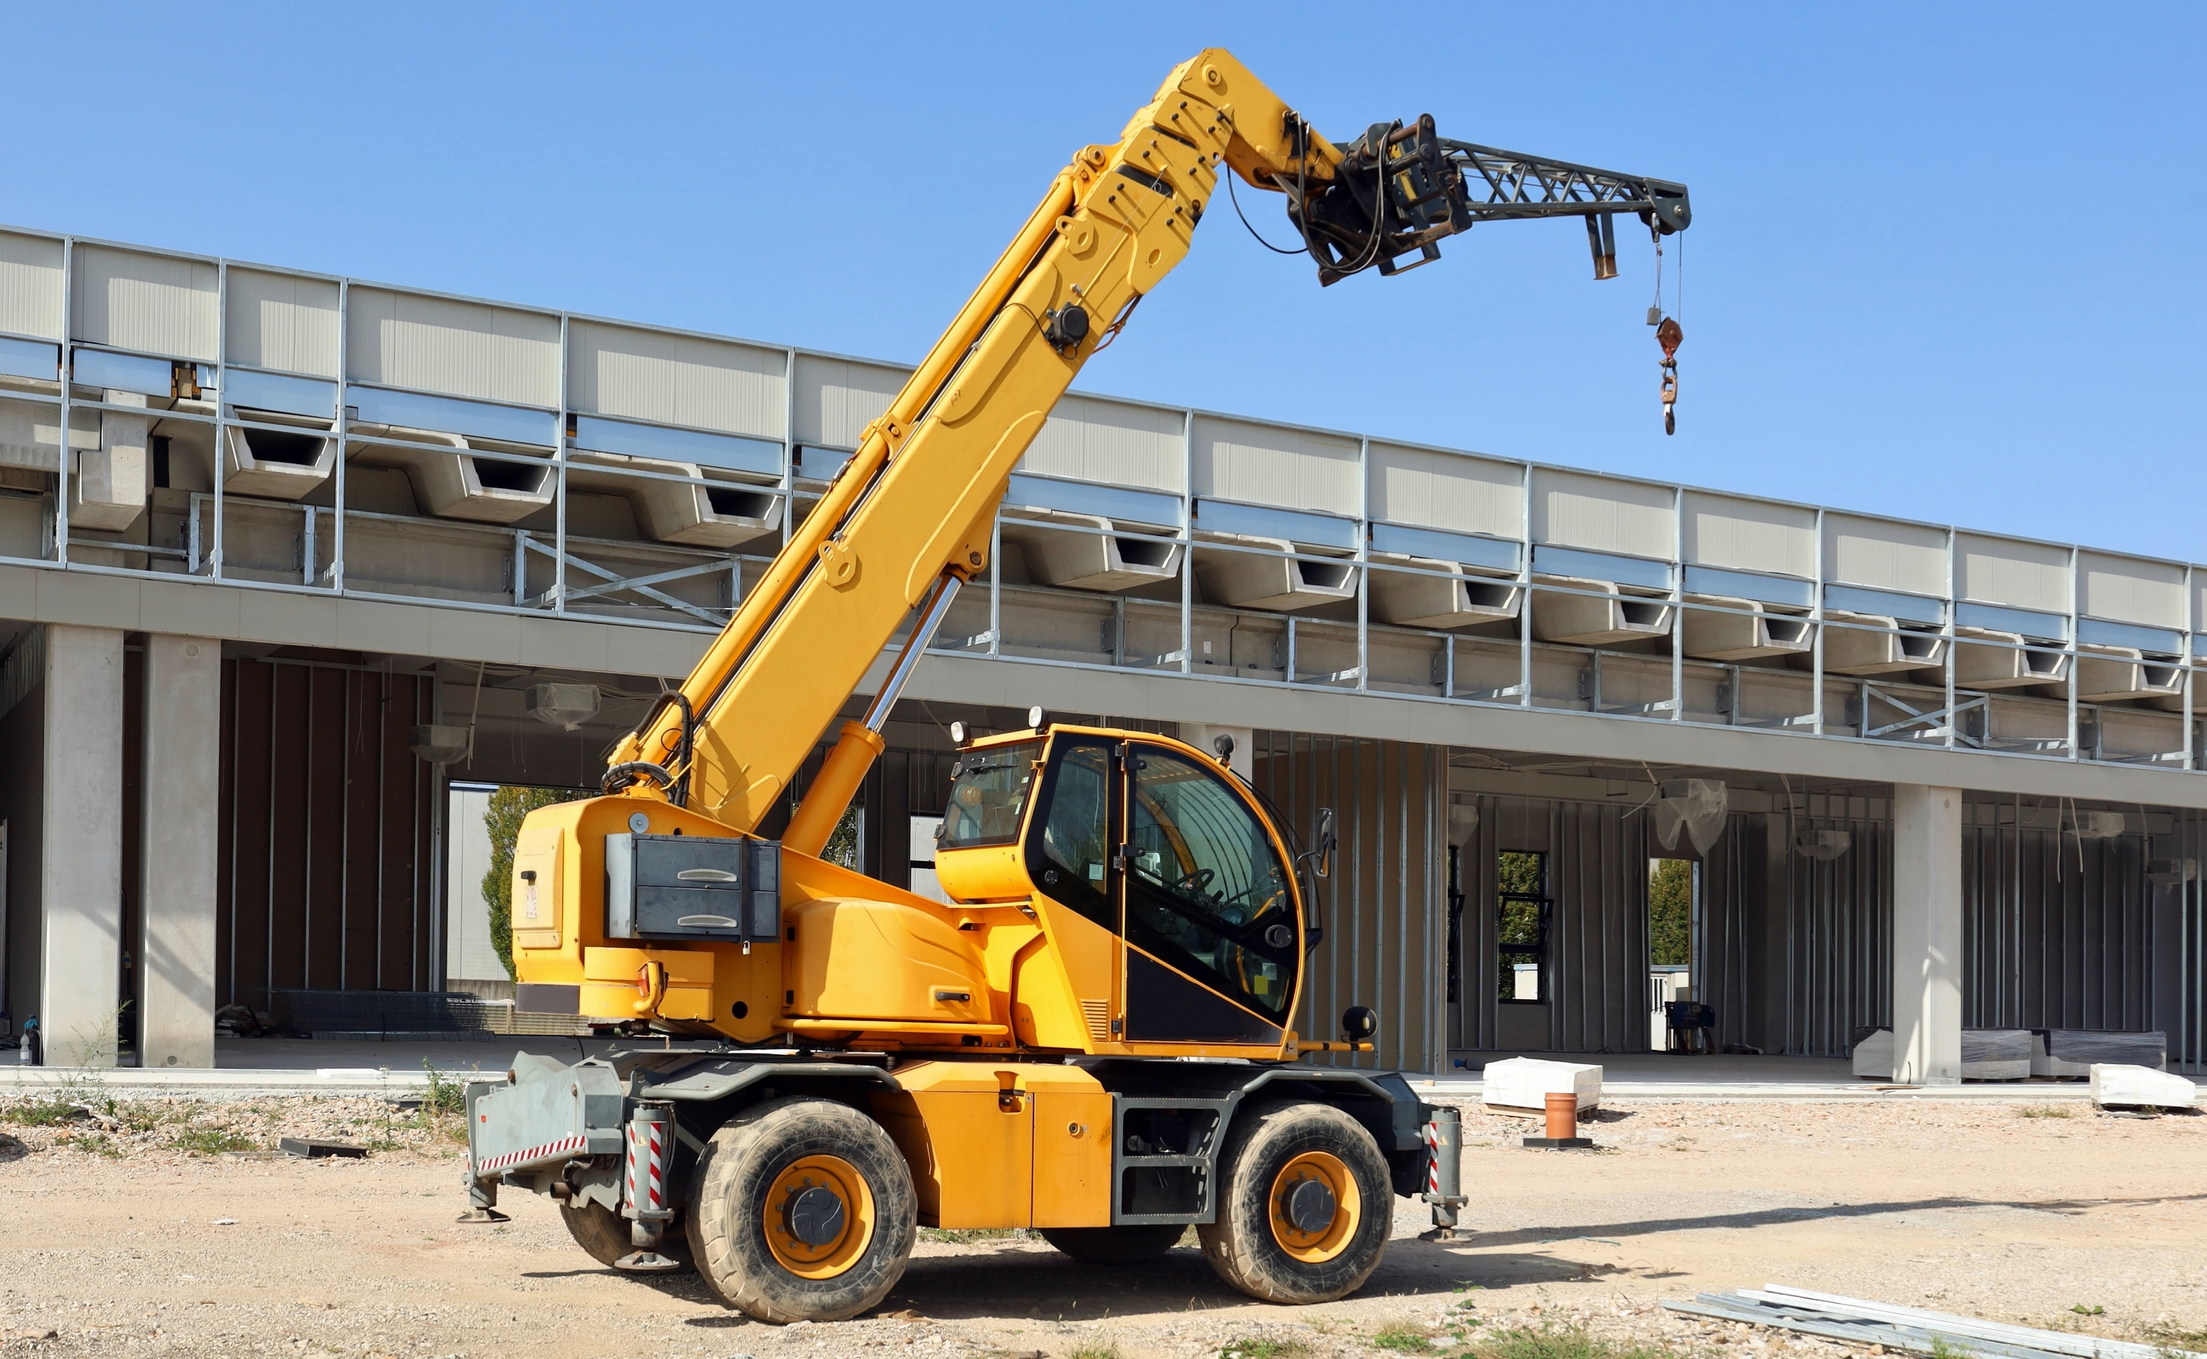 Yellow rotating telehandler at work in front of new commercial building under construction.